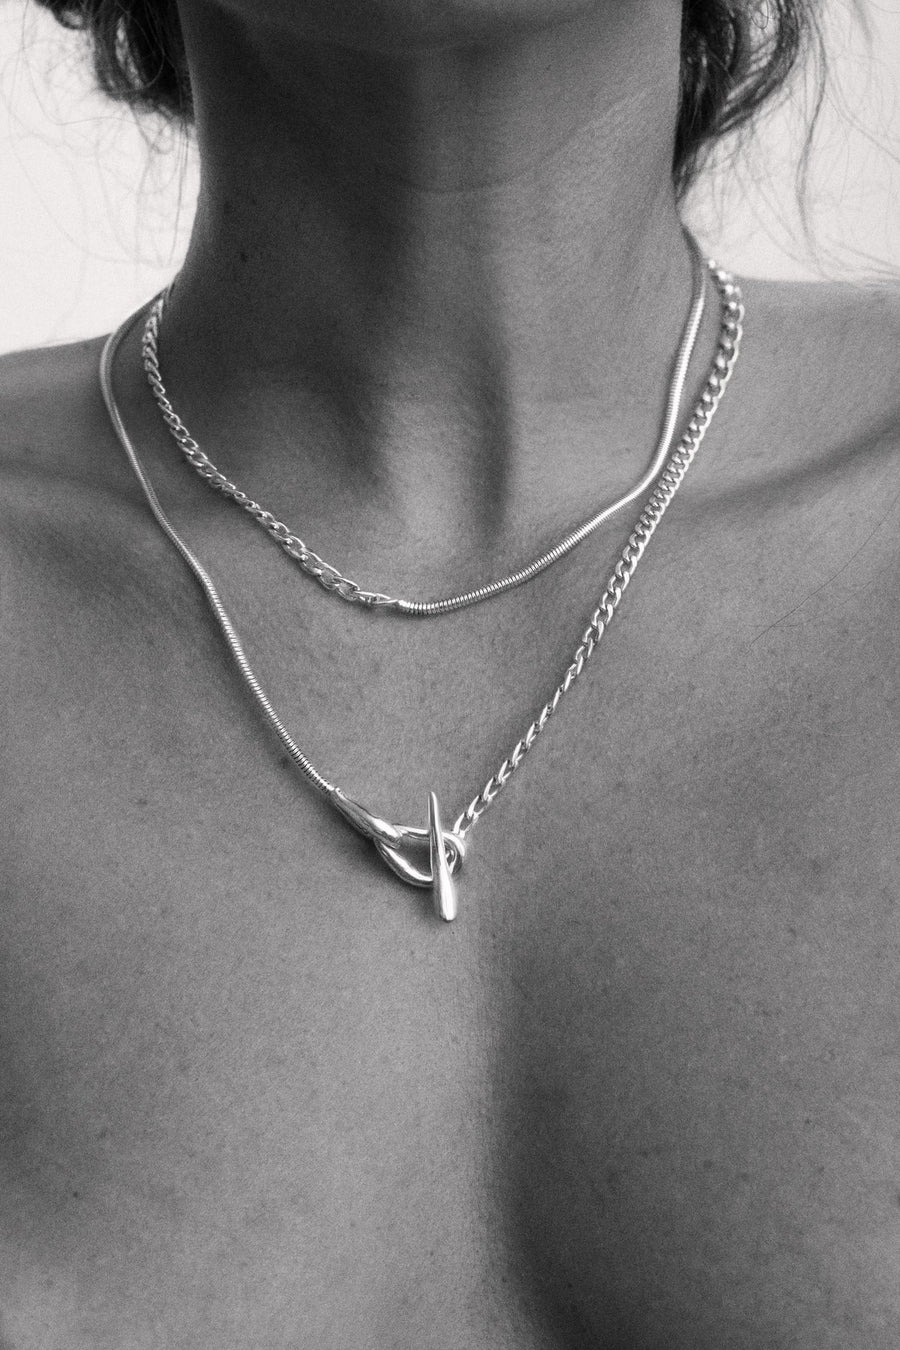 Hernan Herdez- Abrazo necklace-Jewellery-jewelry-Jeryco Store- London- Necklace-sterling silver necklace- recycled silver necklace- sustainable brand-necklaces for him- necklaces for her-necklaces that are unisex- two chain necklace